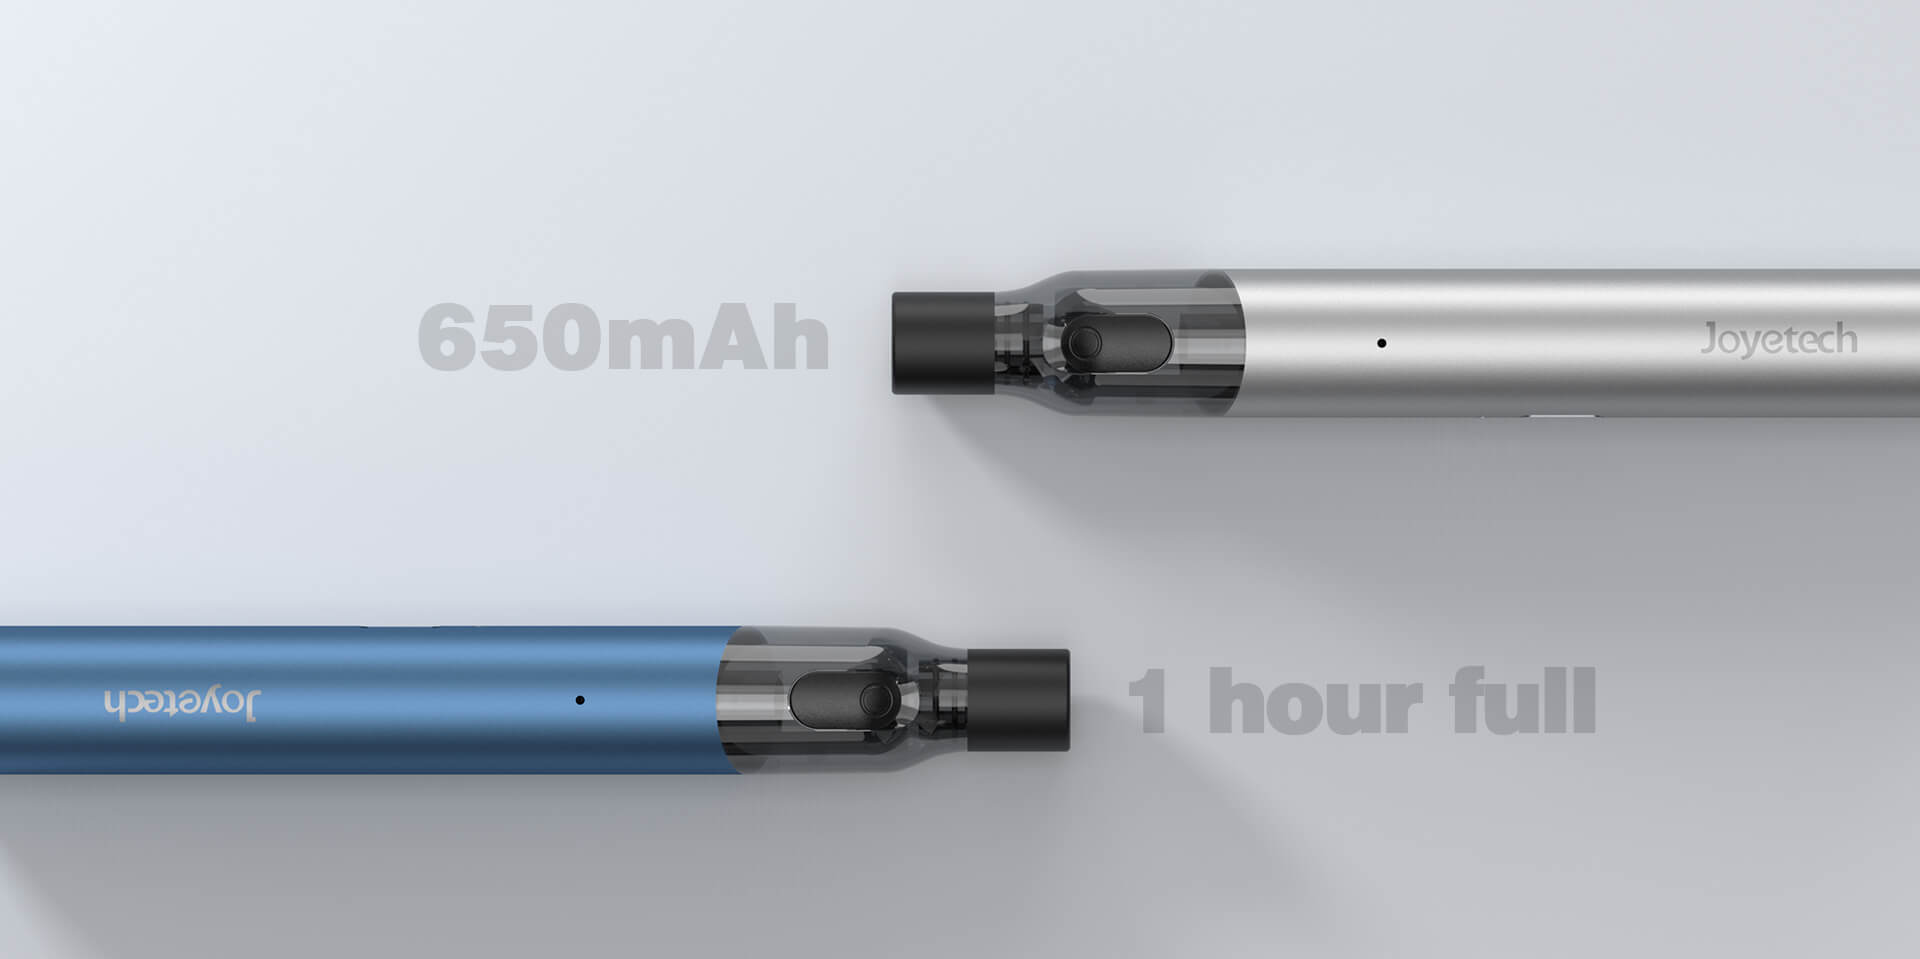 A 650mAh battery takes only 1h to be fully charged.